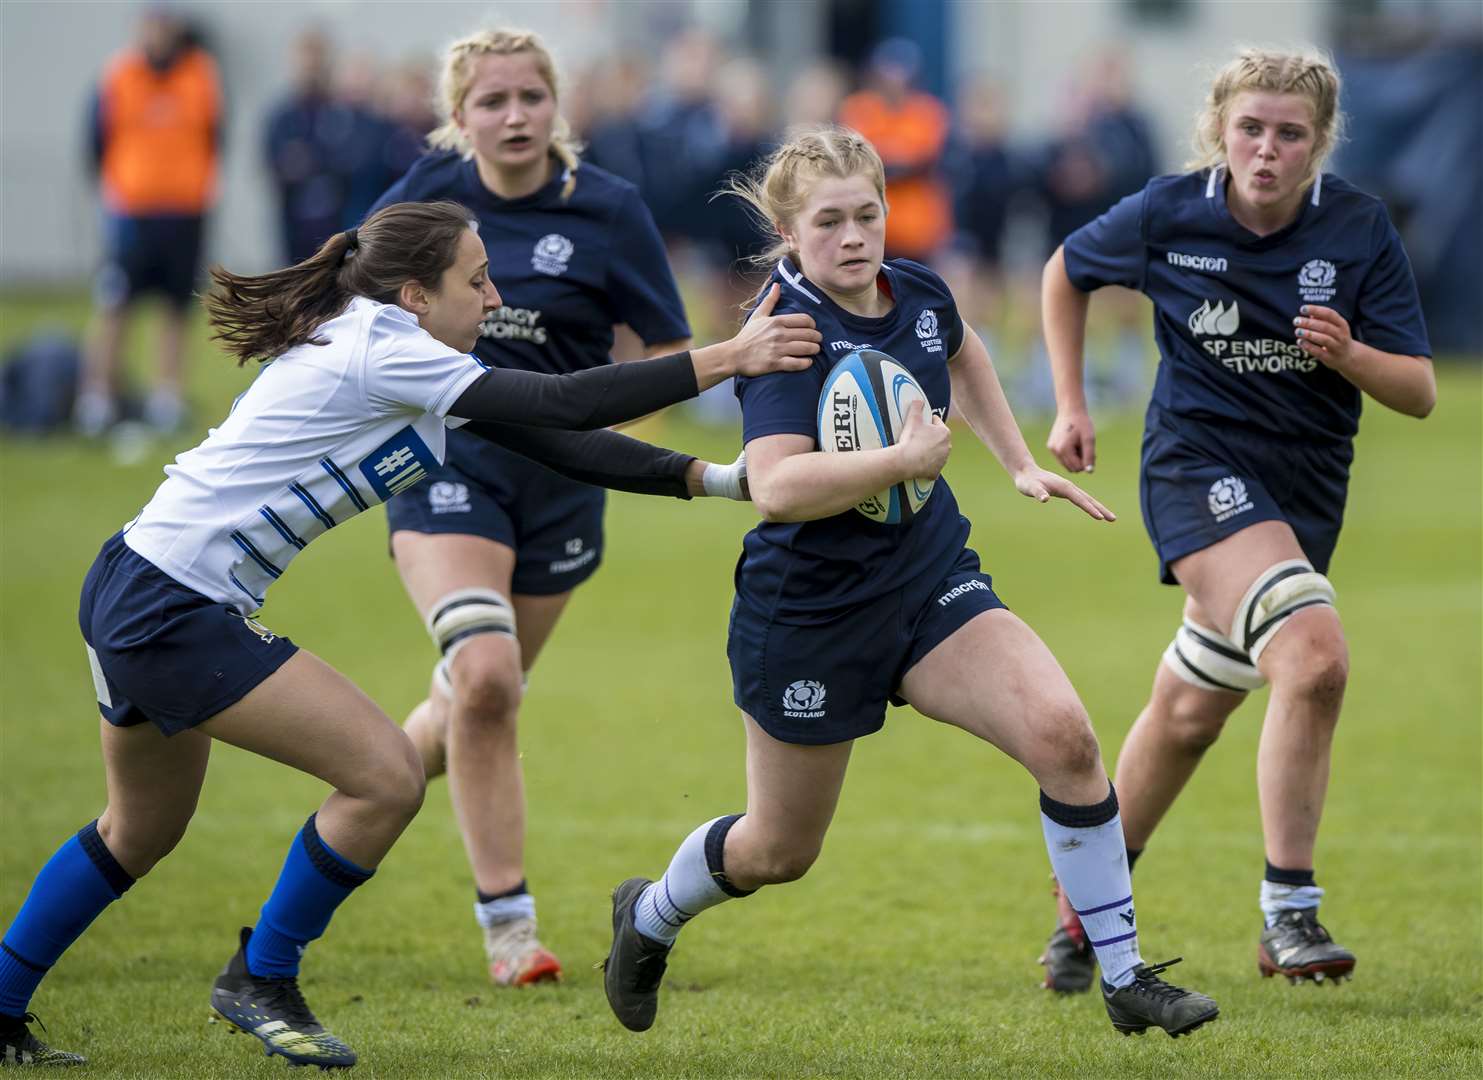 Hannah Dunnett playing for Scotland against Italy in last year's U18 Six Nations women's rugby festival in Edinburgh. Picture: Craig Watson / Inpho / Six Nations